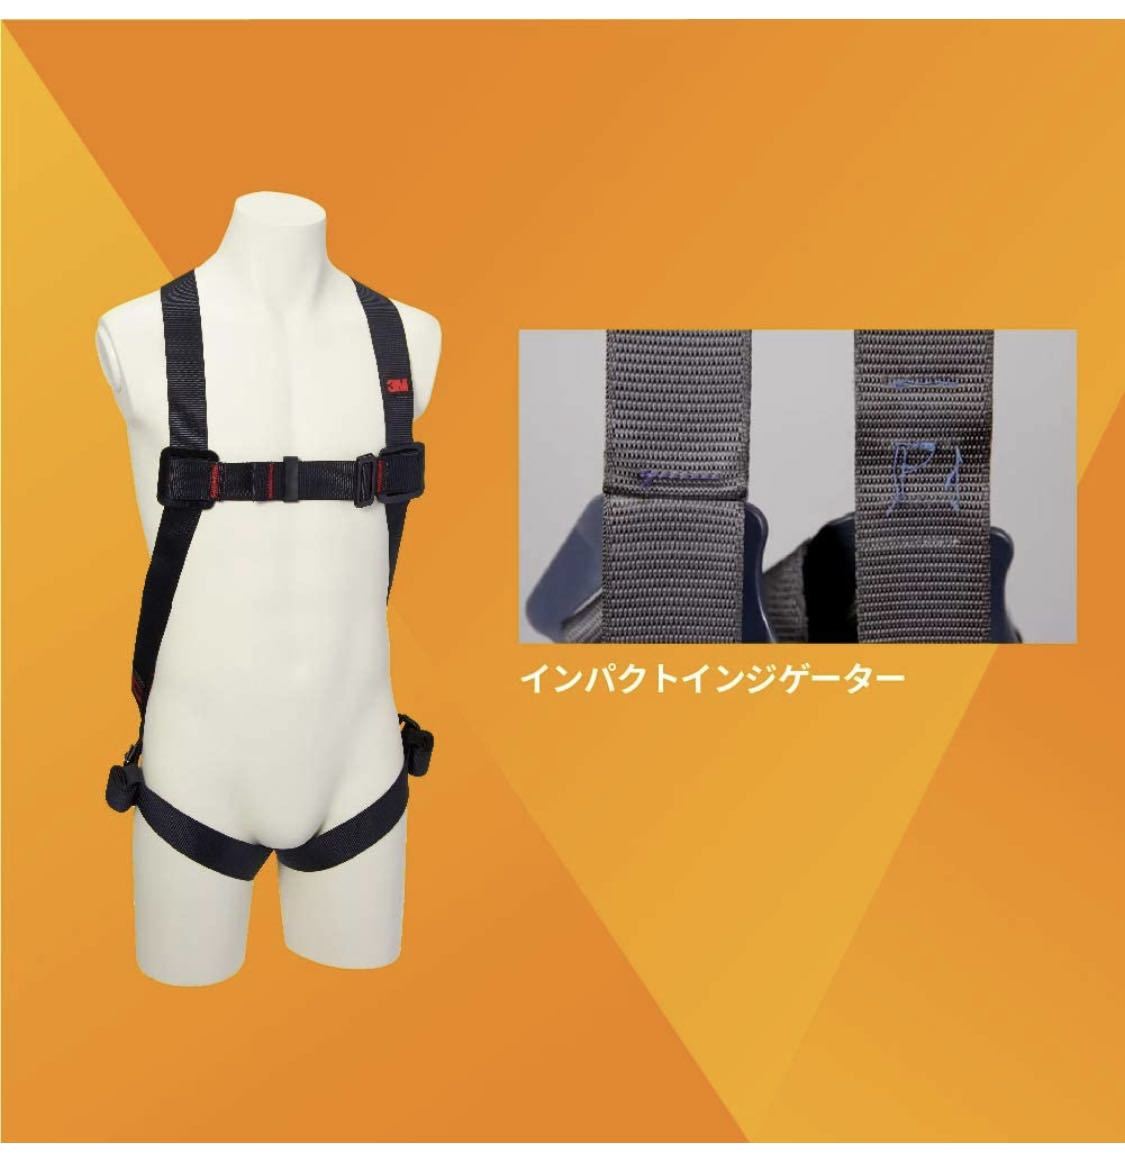  quick shipping![ new standard conform ] 3M full Harness XL size protector 1161650N